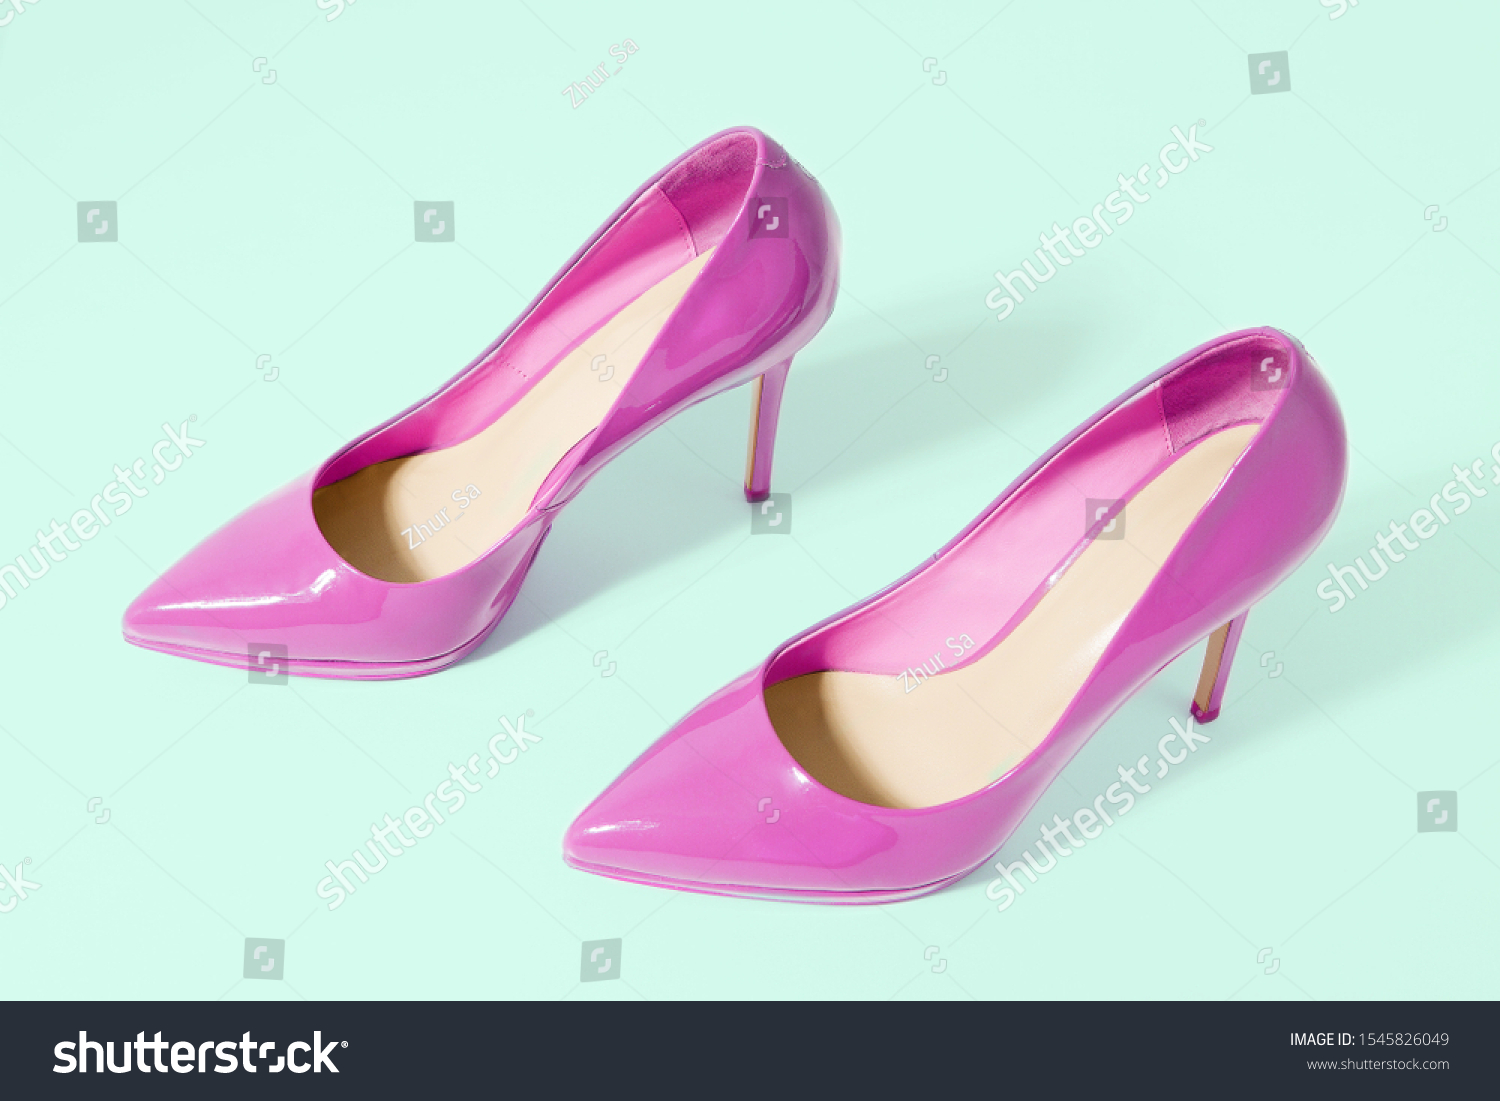 patent leather shoes in summer